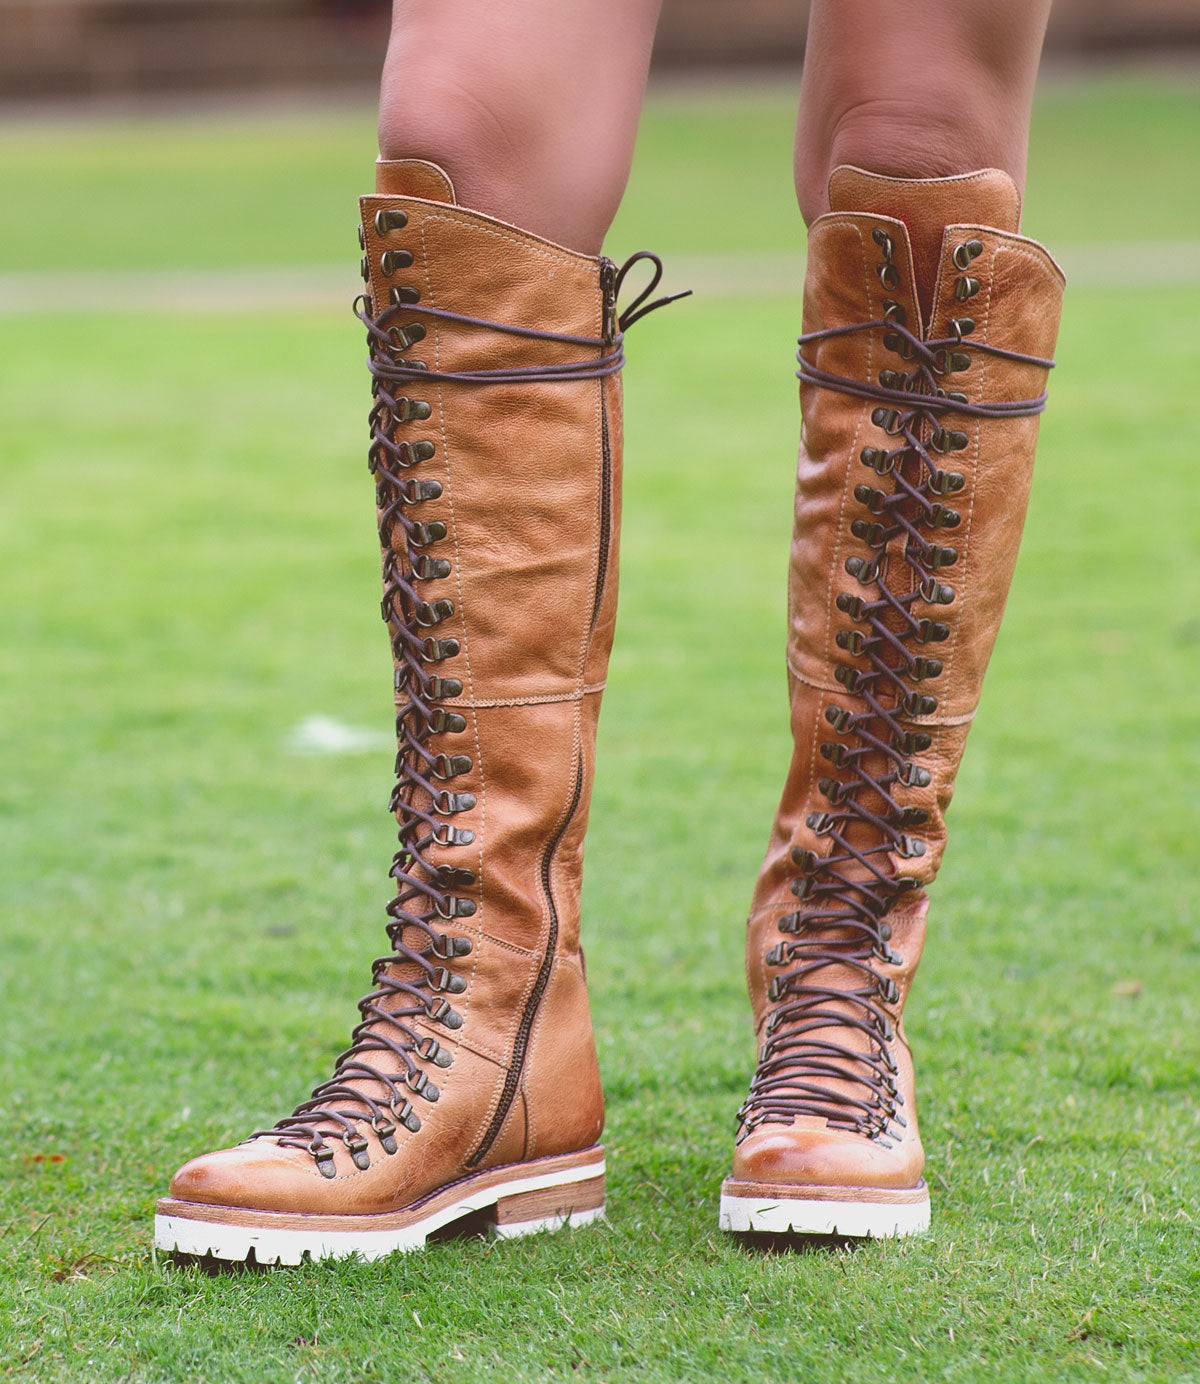 Close-up of a person wearing knee-high, brown leather Lustrous boots by Bed Stu with white soles and a cushioned insole, standing on a grassy surface.